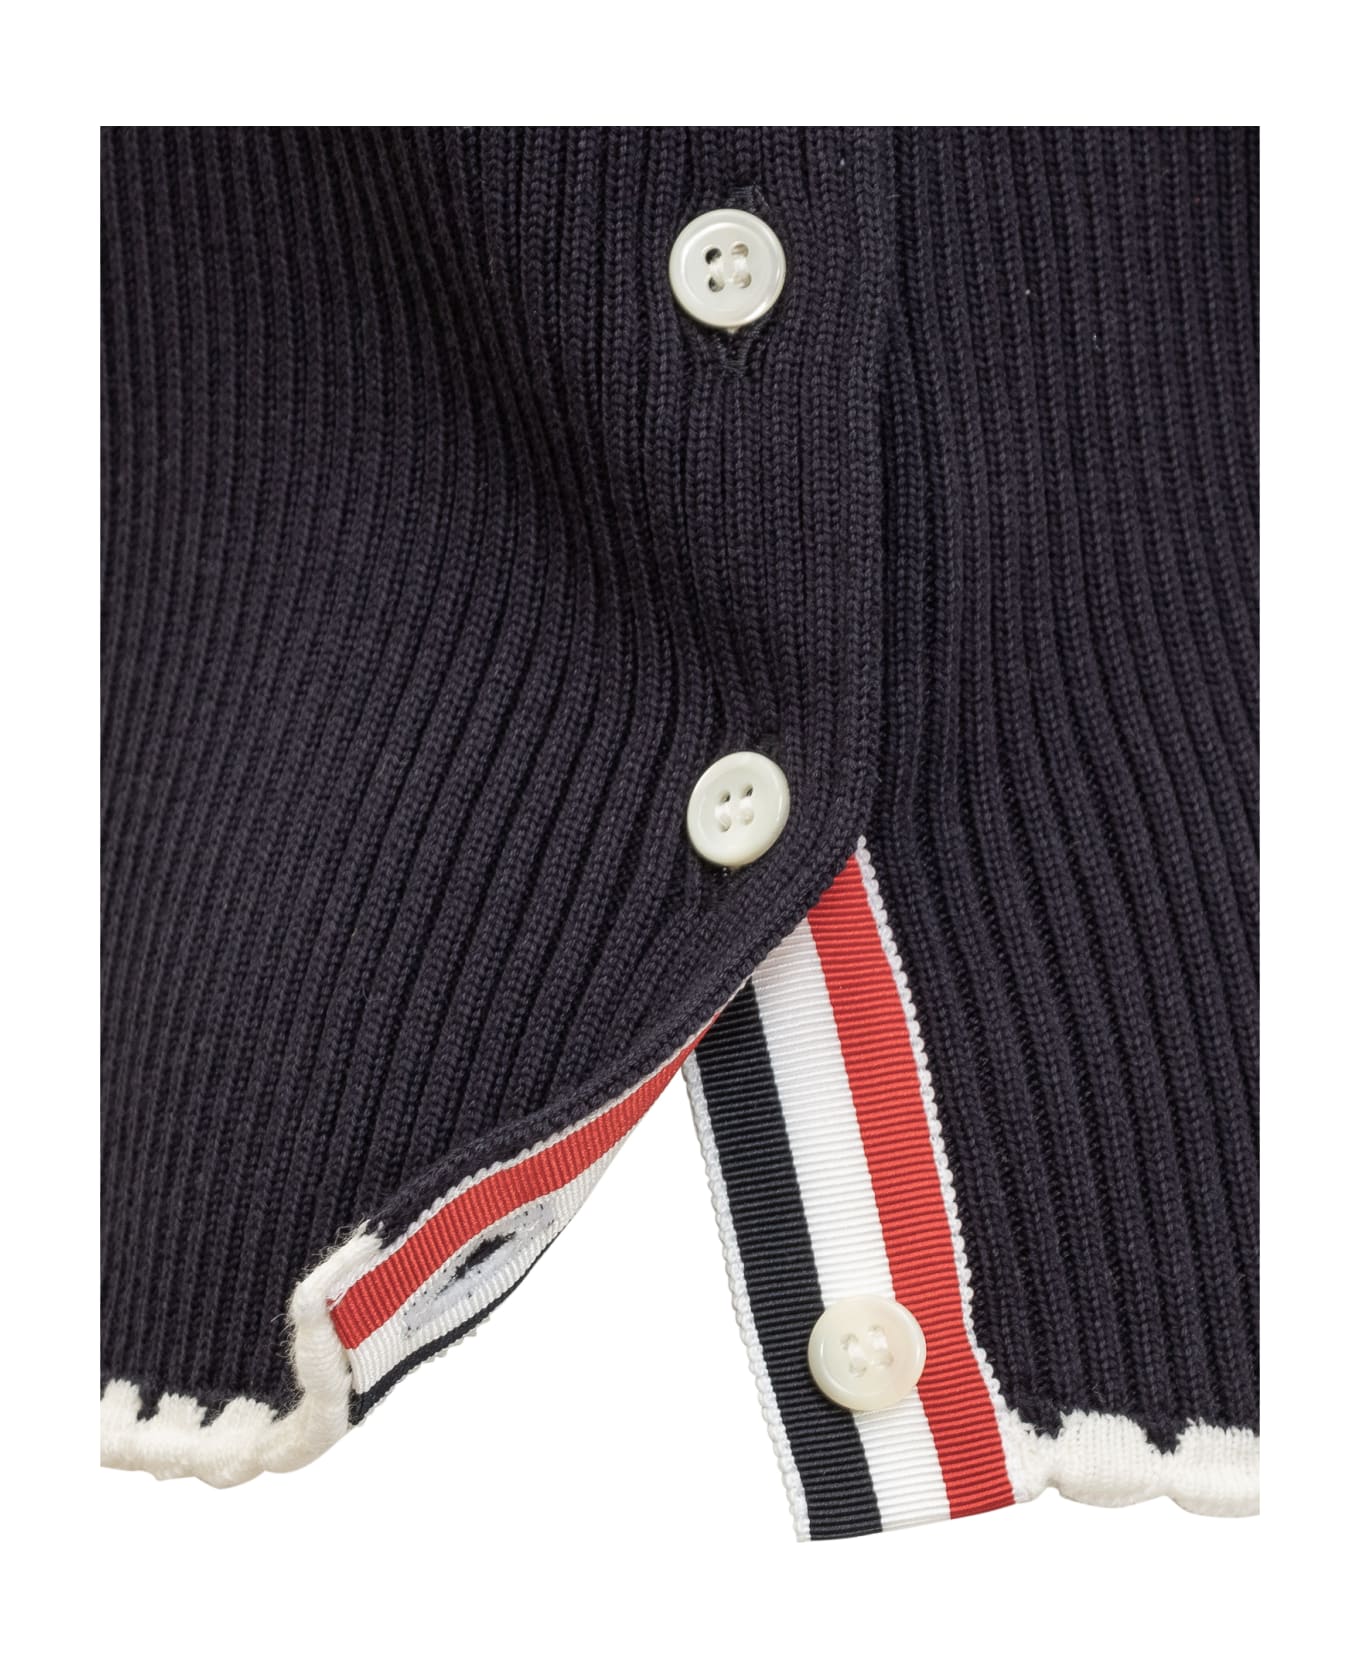 Thom Browne Hector Intarsia Sweater - NAVY